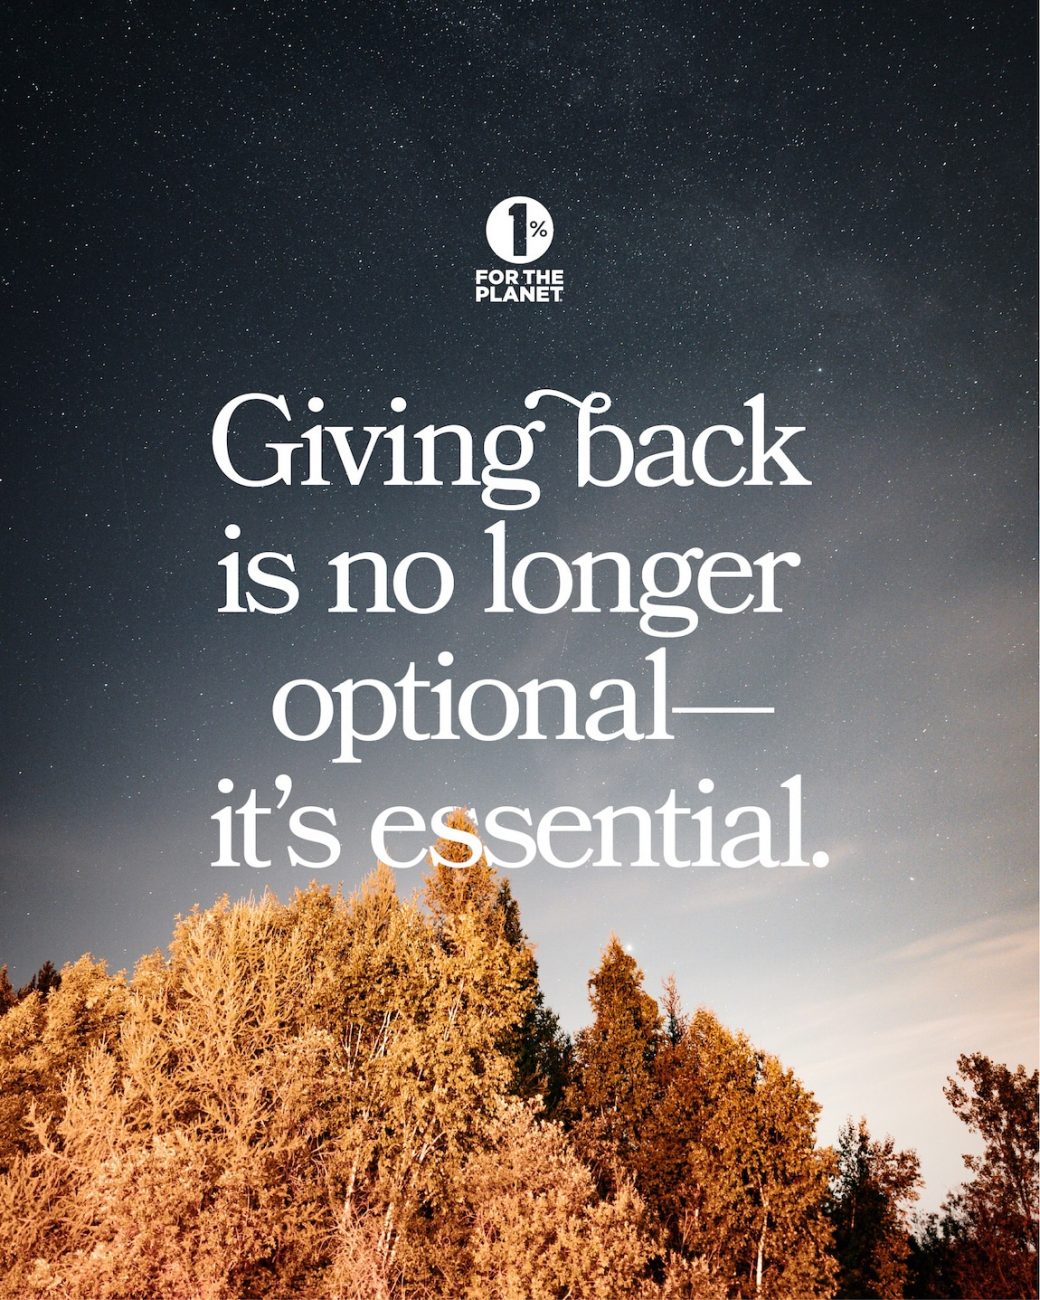 Giving back is no longer optional - it's essential